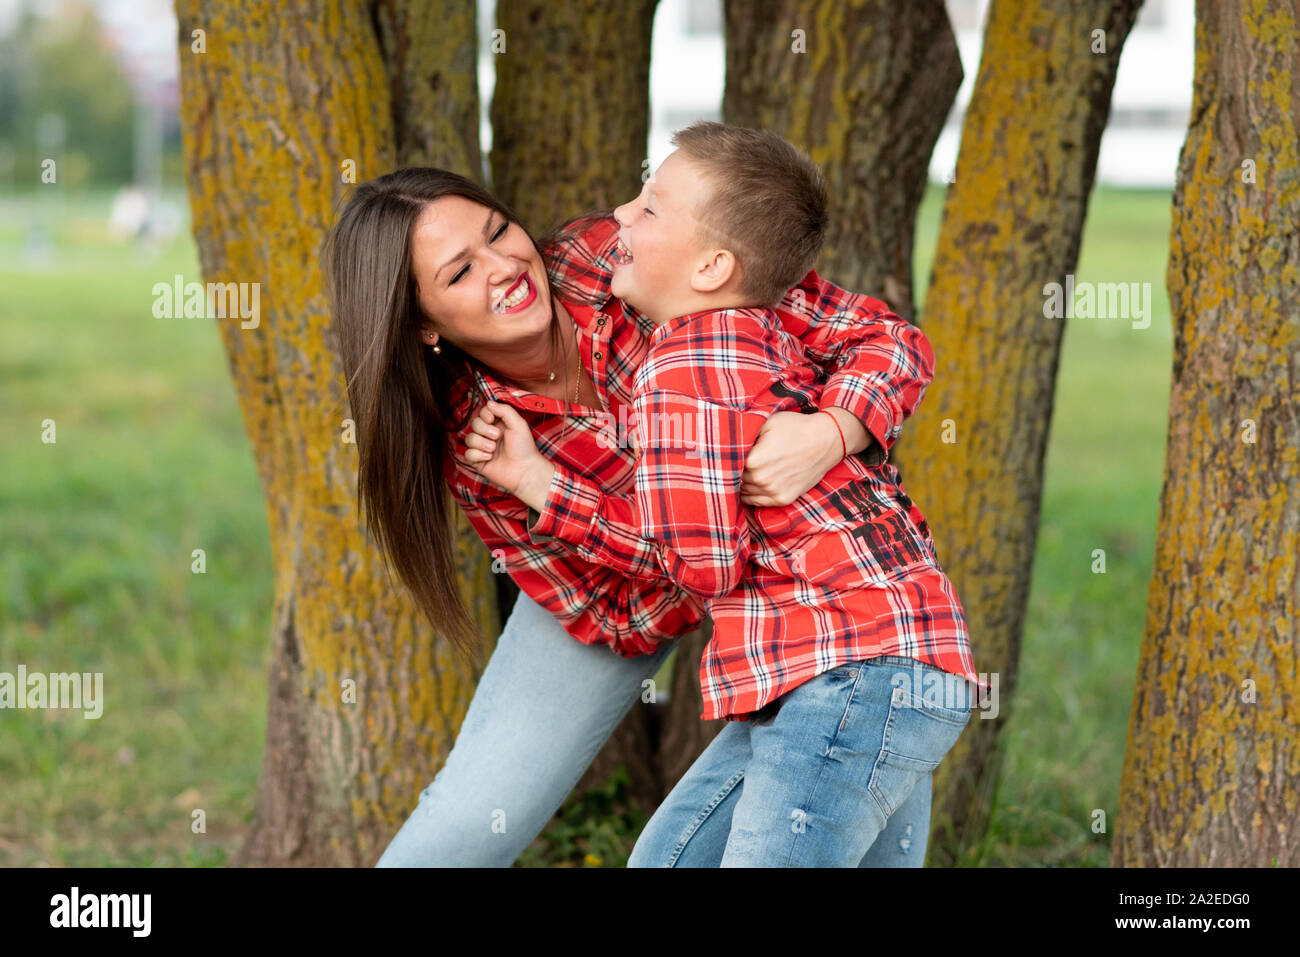 Mom and son indulge, laughing merrily. Stock Photo